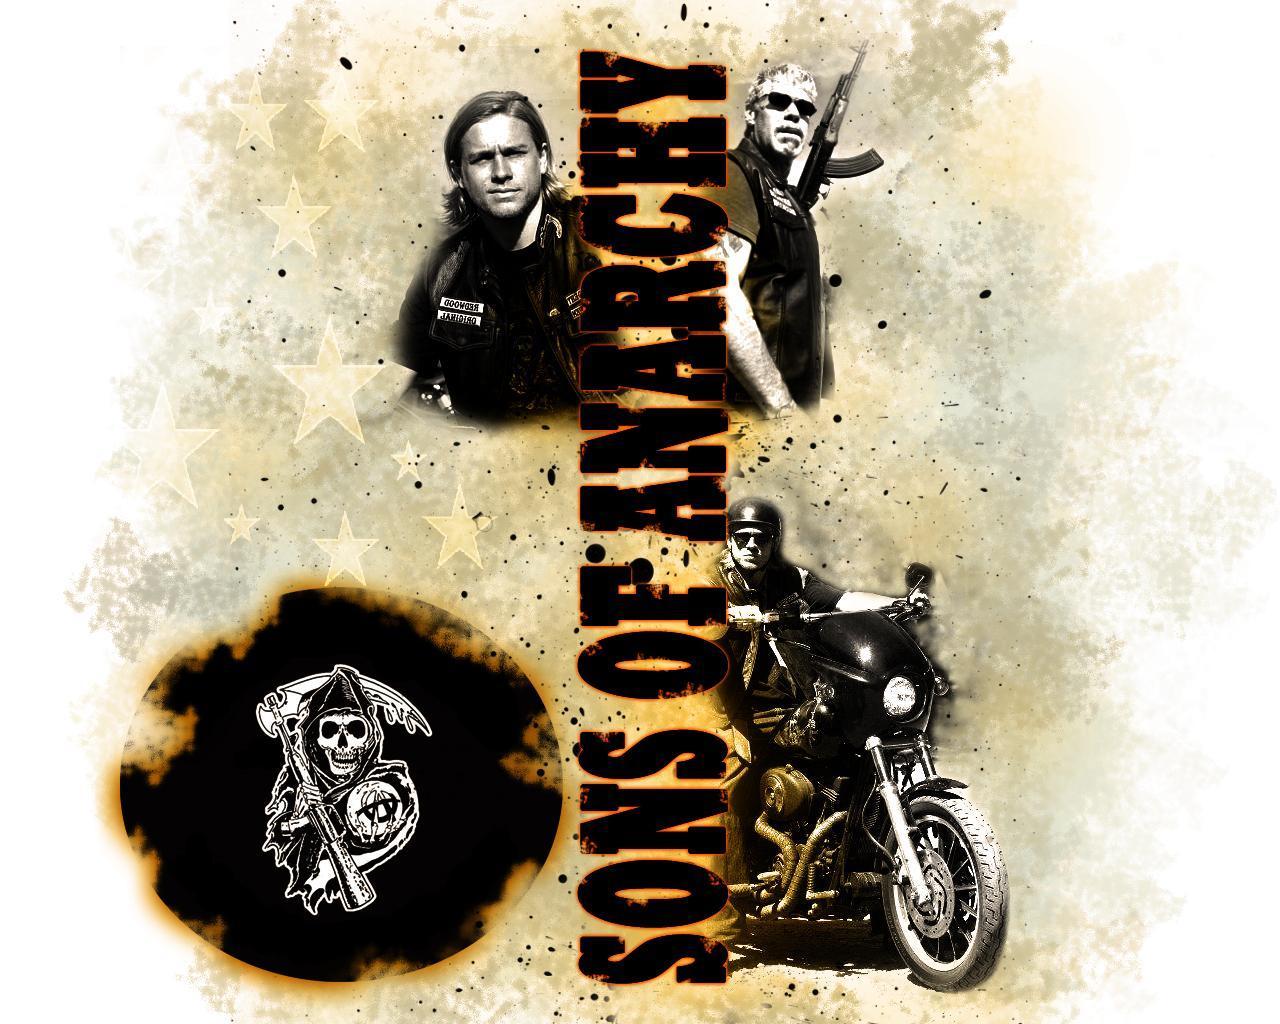 Sons Of Anarchy Wallpaper Gallery